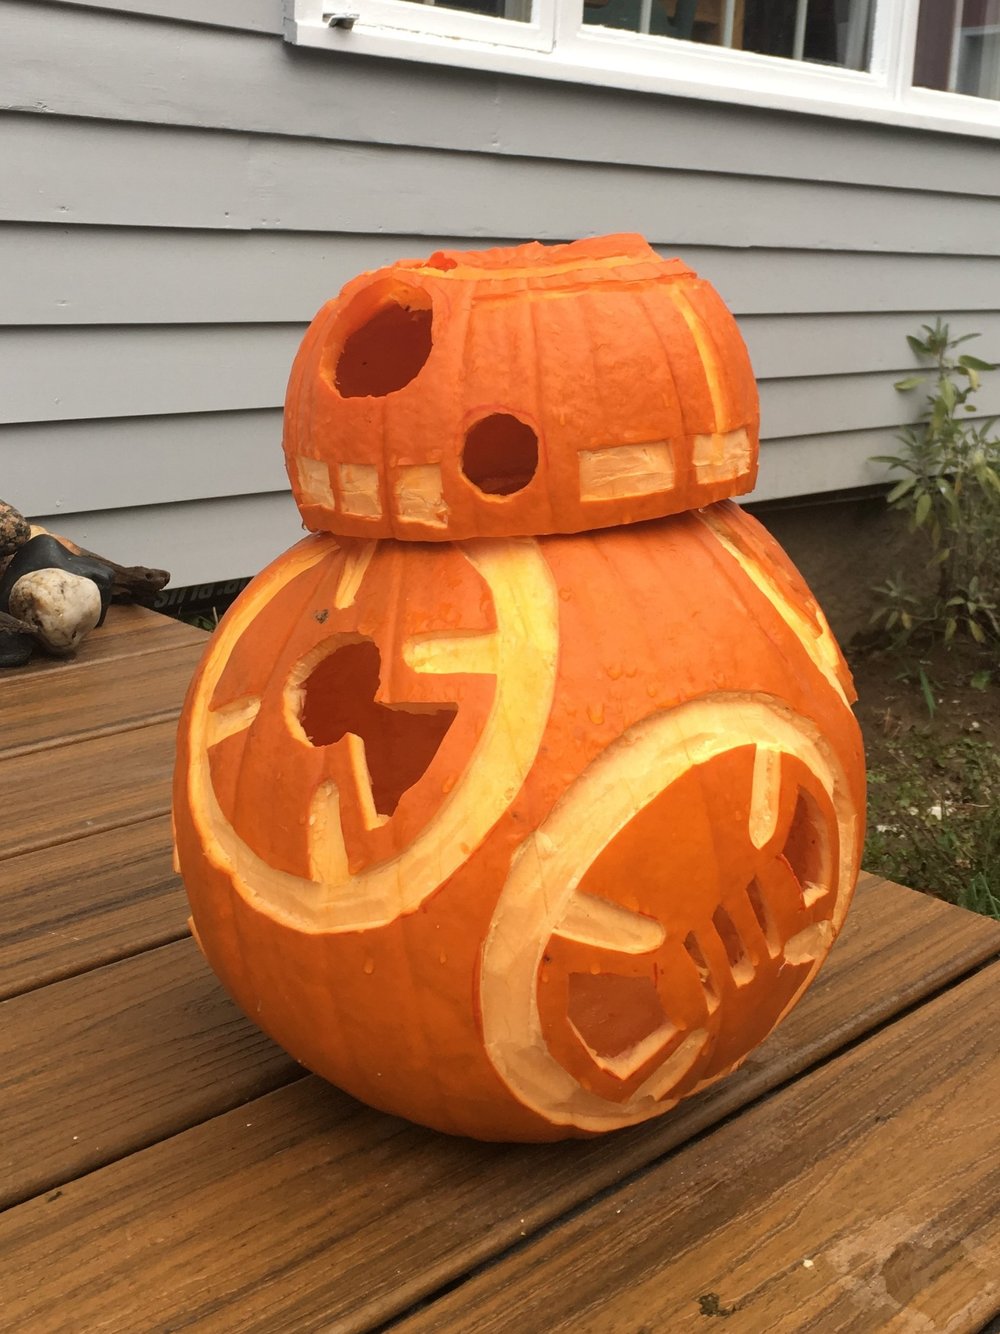  The jack o’lantern had to be BB-8. It was easier than C-3PO, you know? 